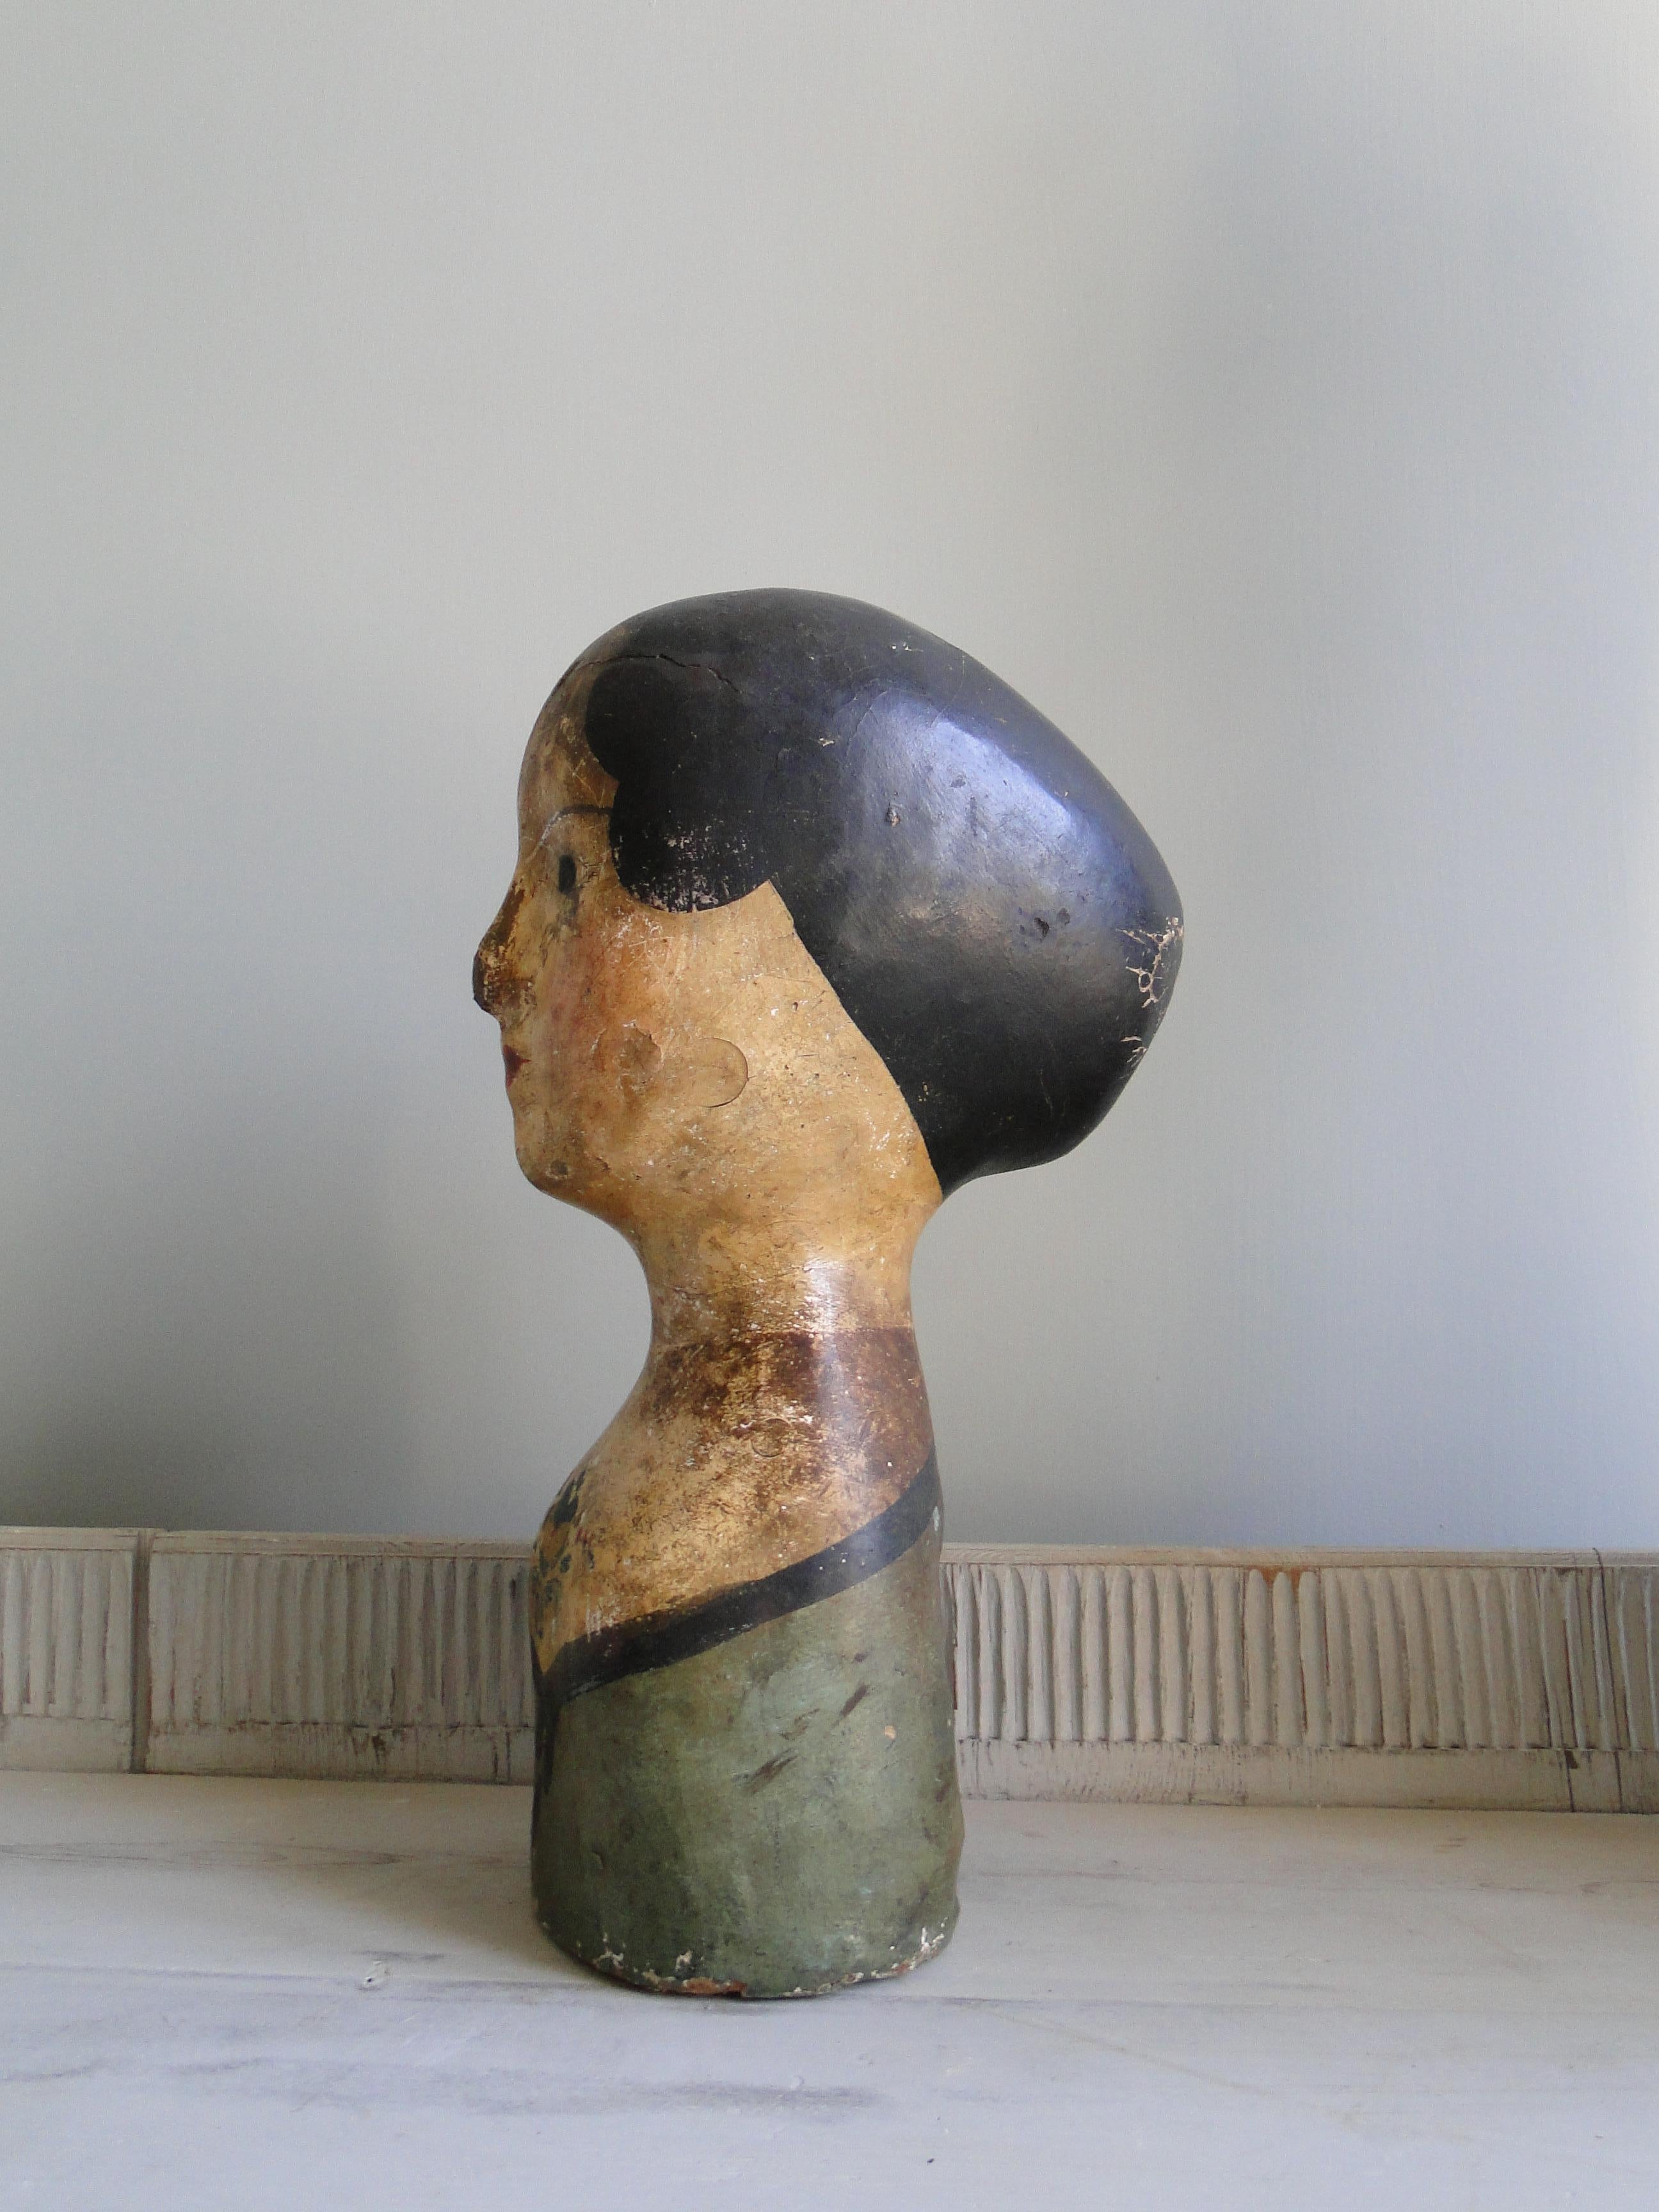 Antique French 19th century wig stand or head called Marotte. In original paint out of papier maché.